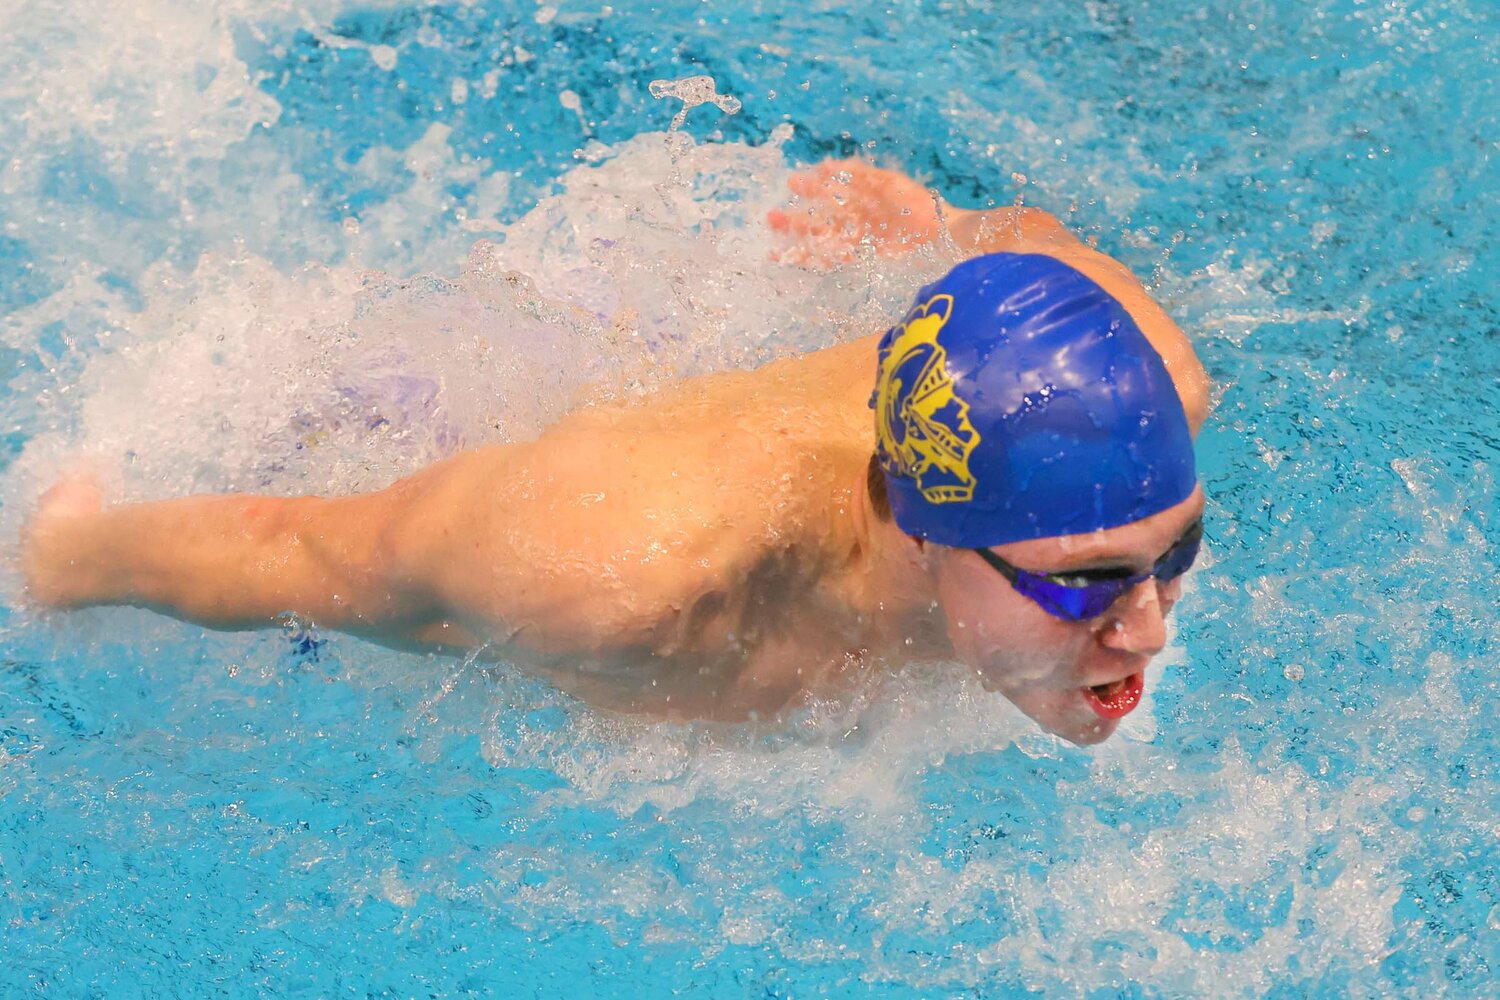 Crawfordsville's Whitman Horton will be back at the state finals looking to build off of his sixth place finish a year ago in the backstroke.